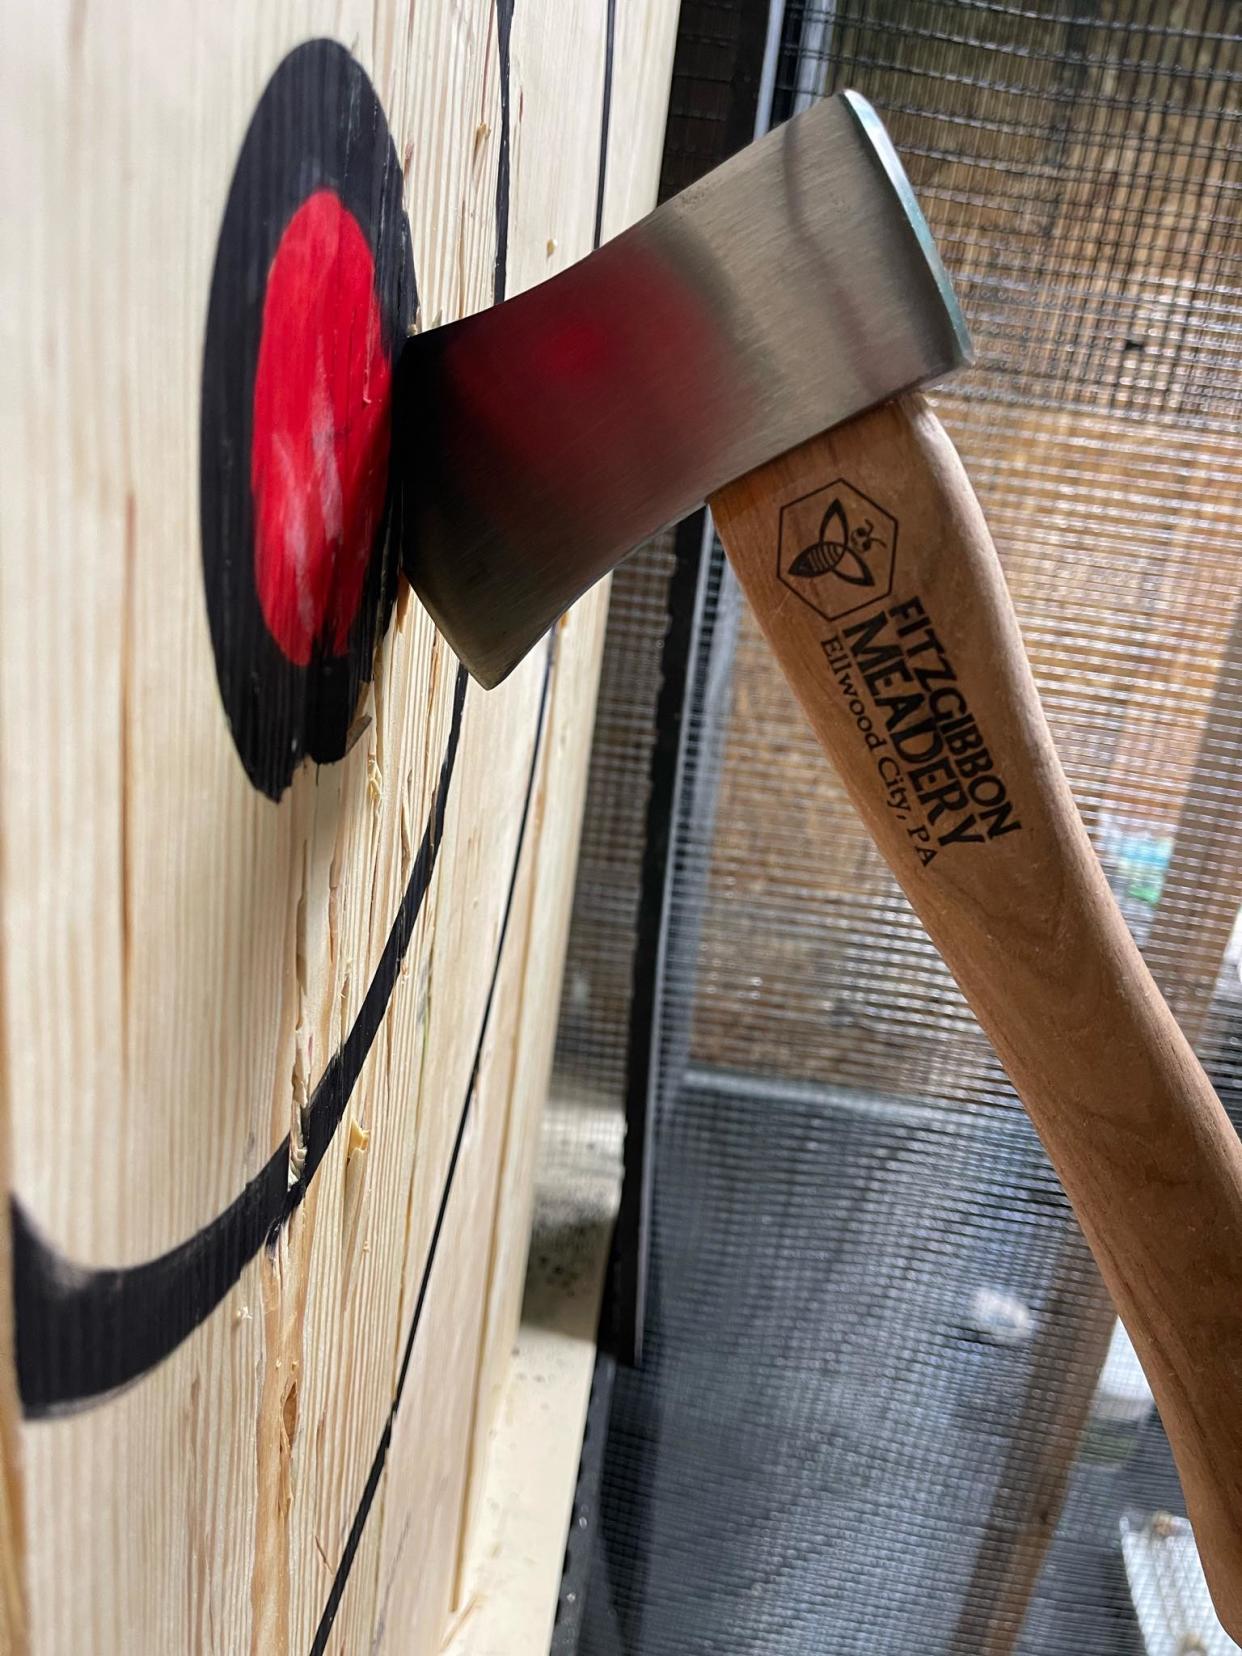 Test your axe-throwing skills at Fitzgibbon Meadery in Ellwood City.